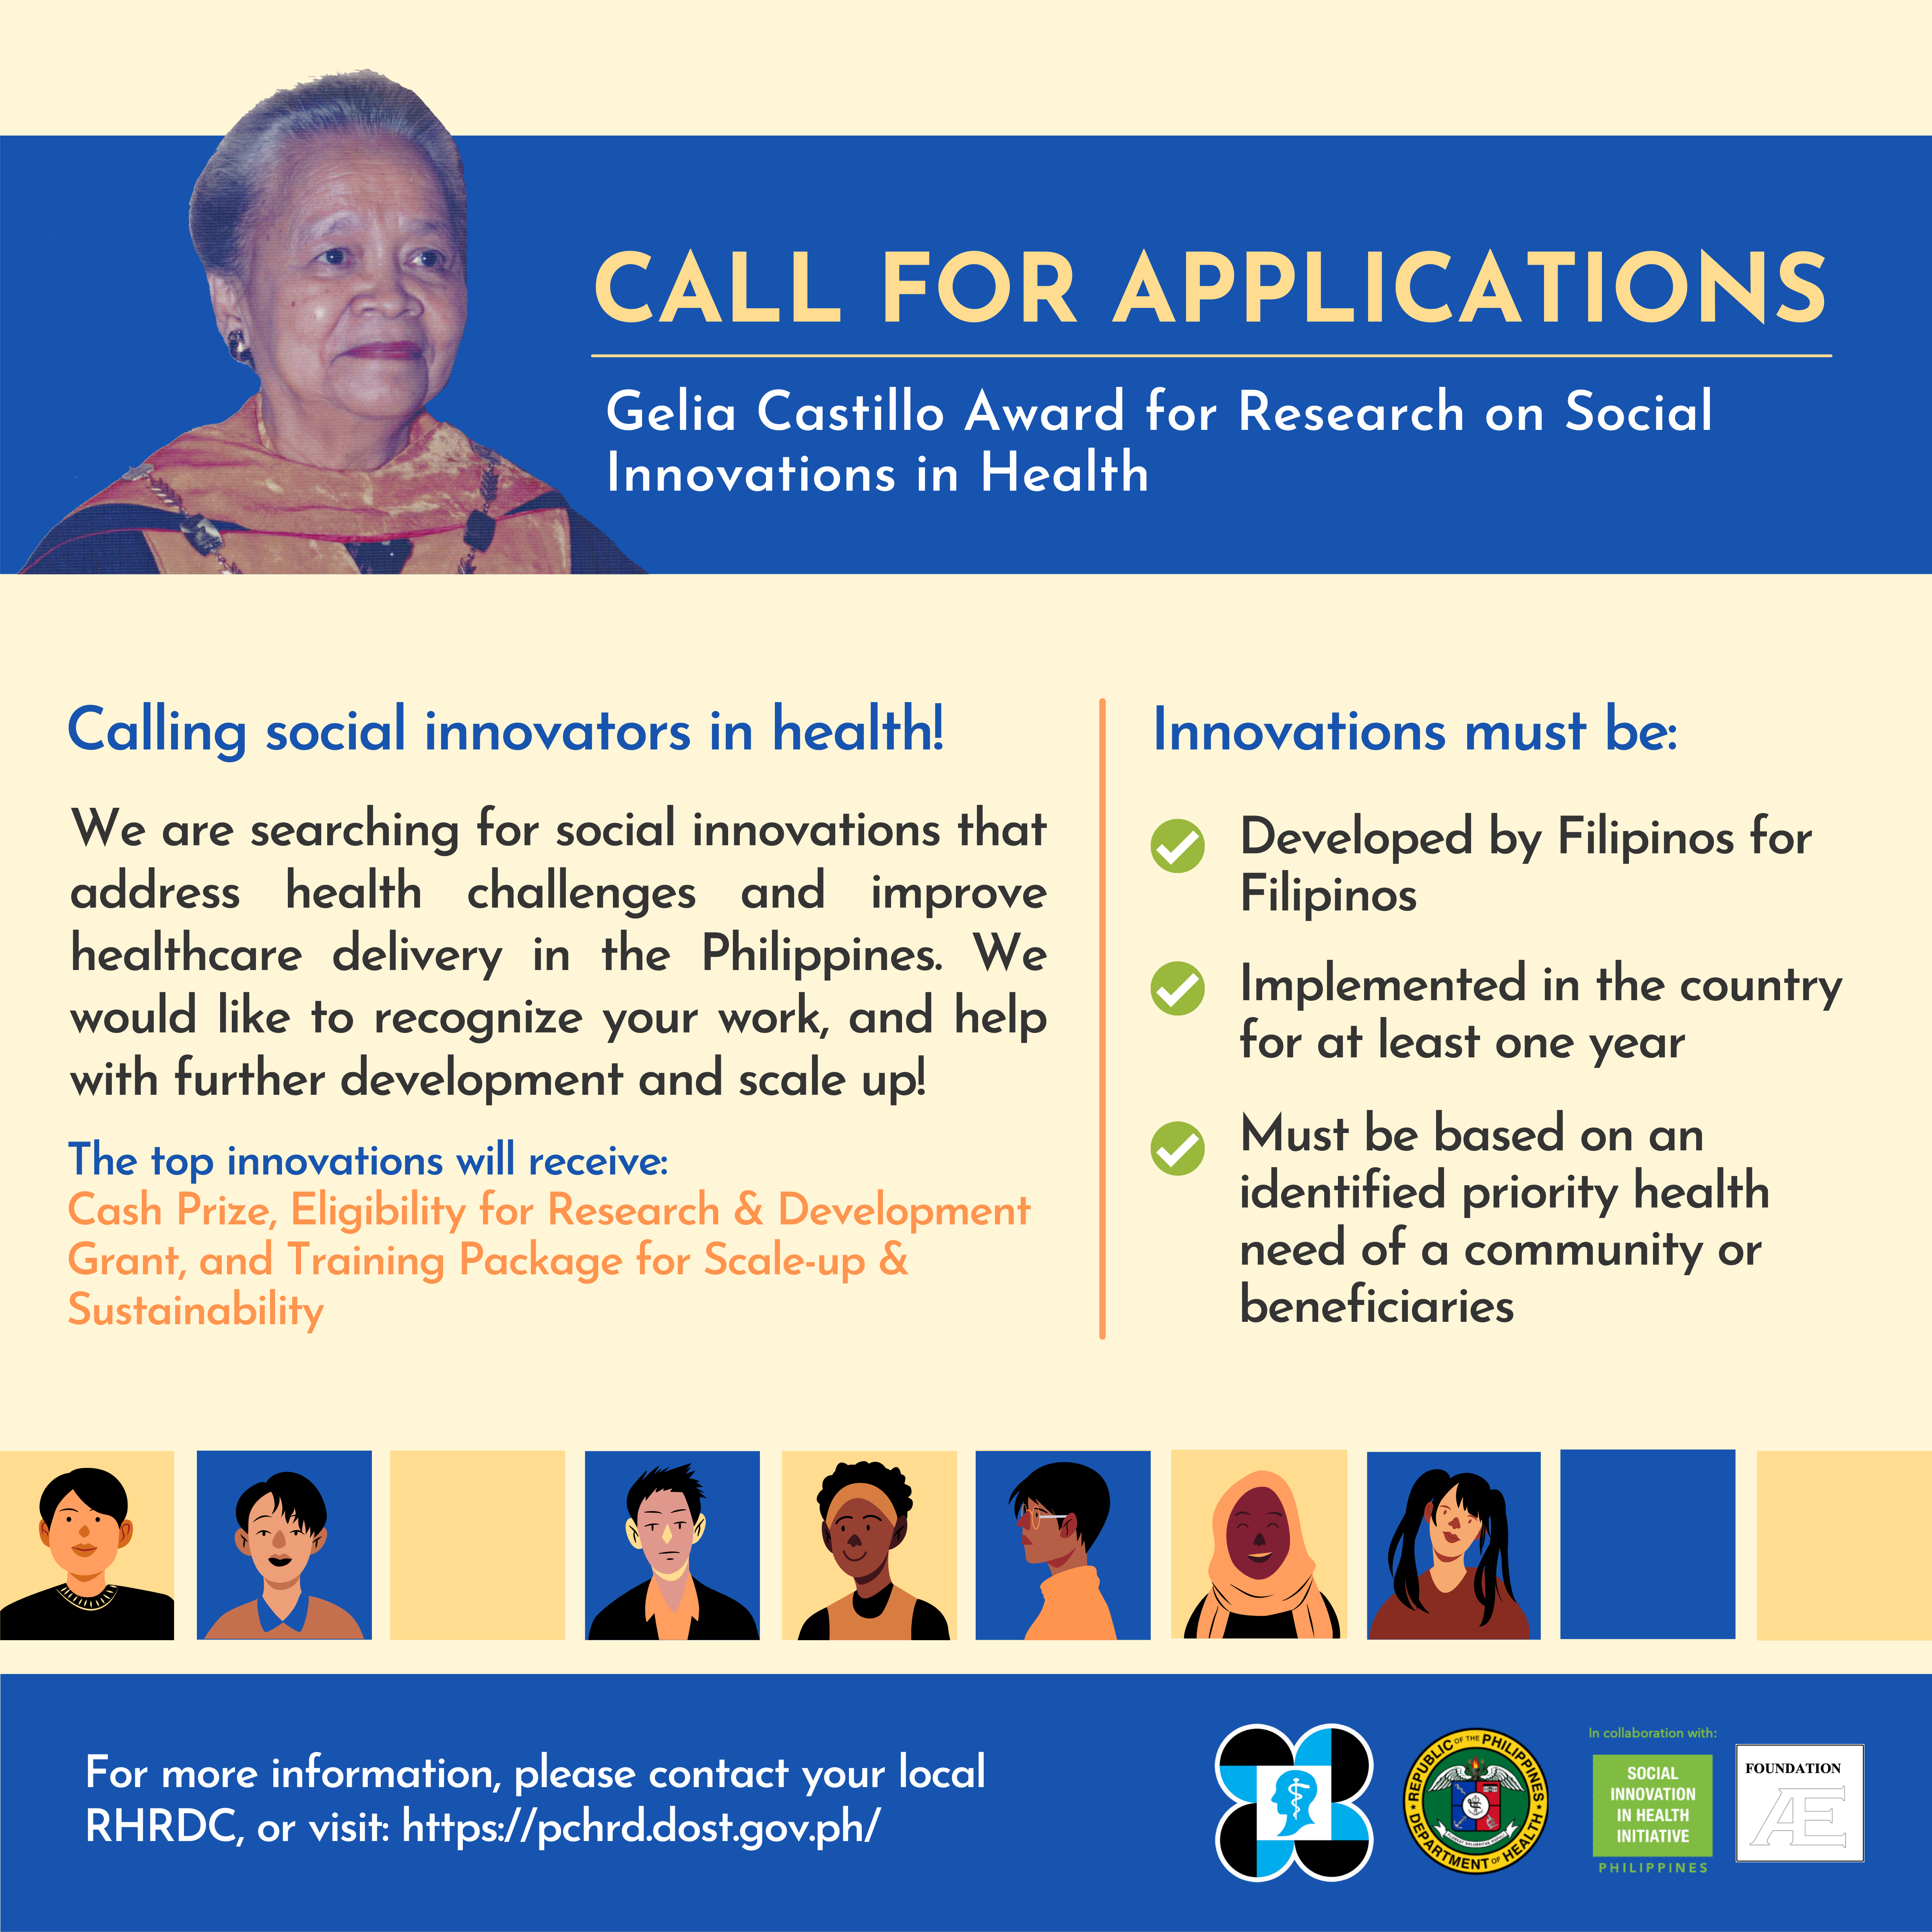 Extended until May 31, 2022: Call for Applications: The Gelia Castillo Award for Research on Social Innovations in Health